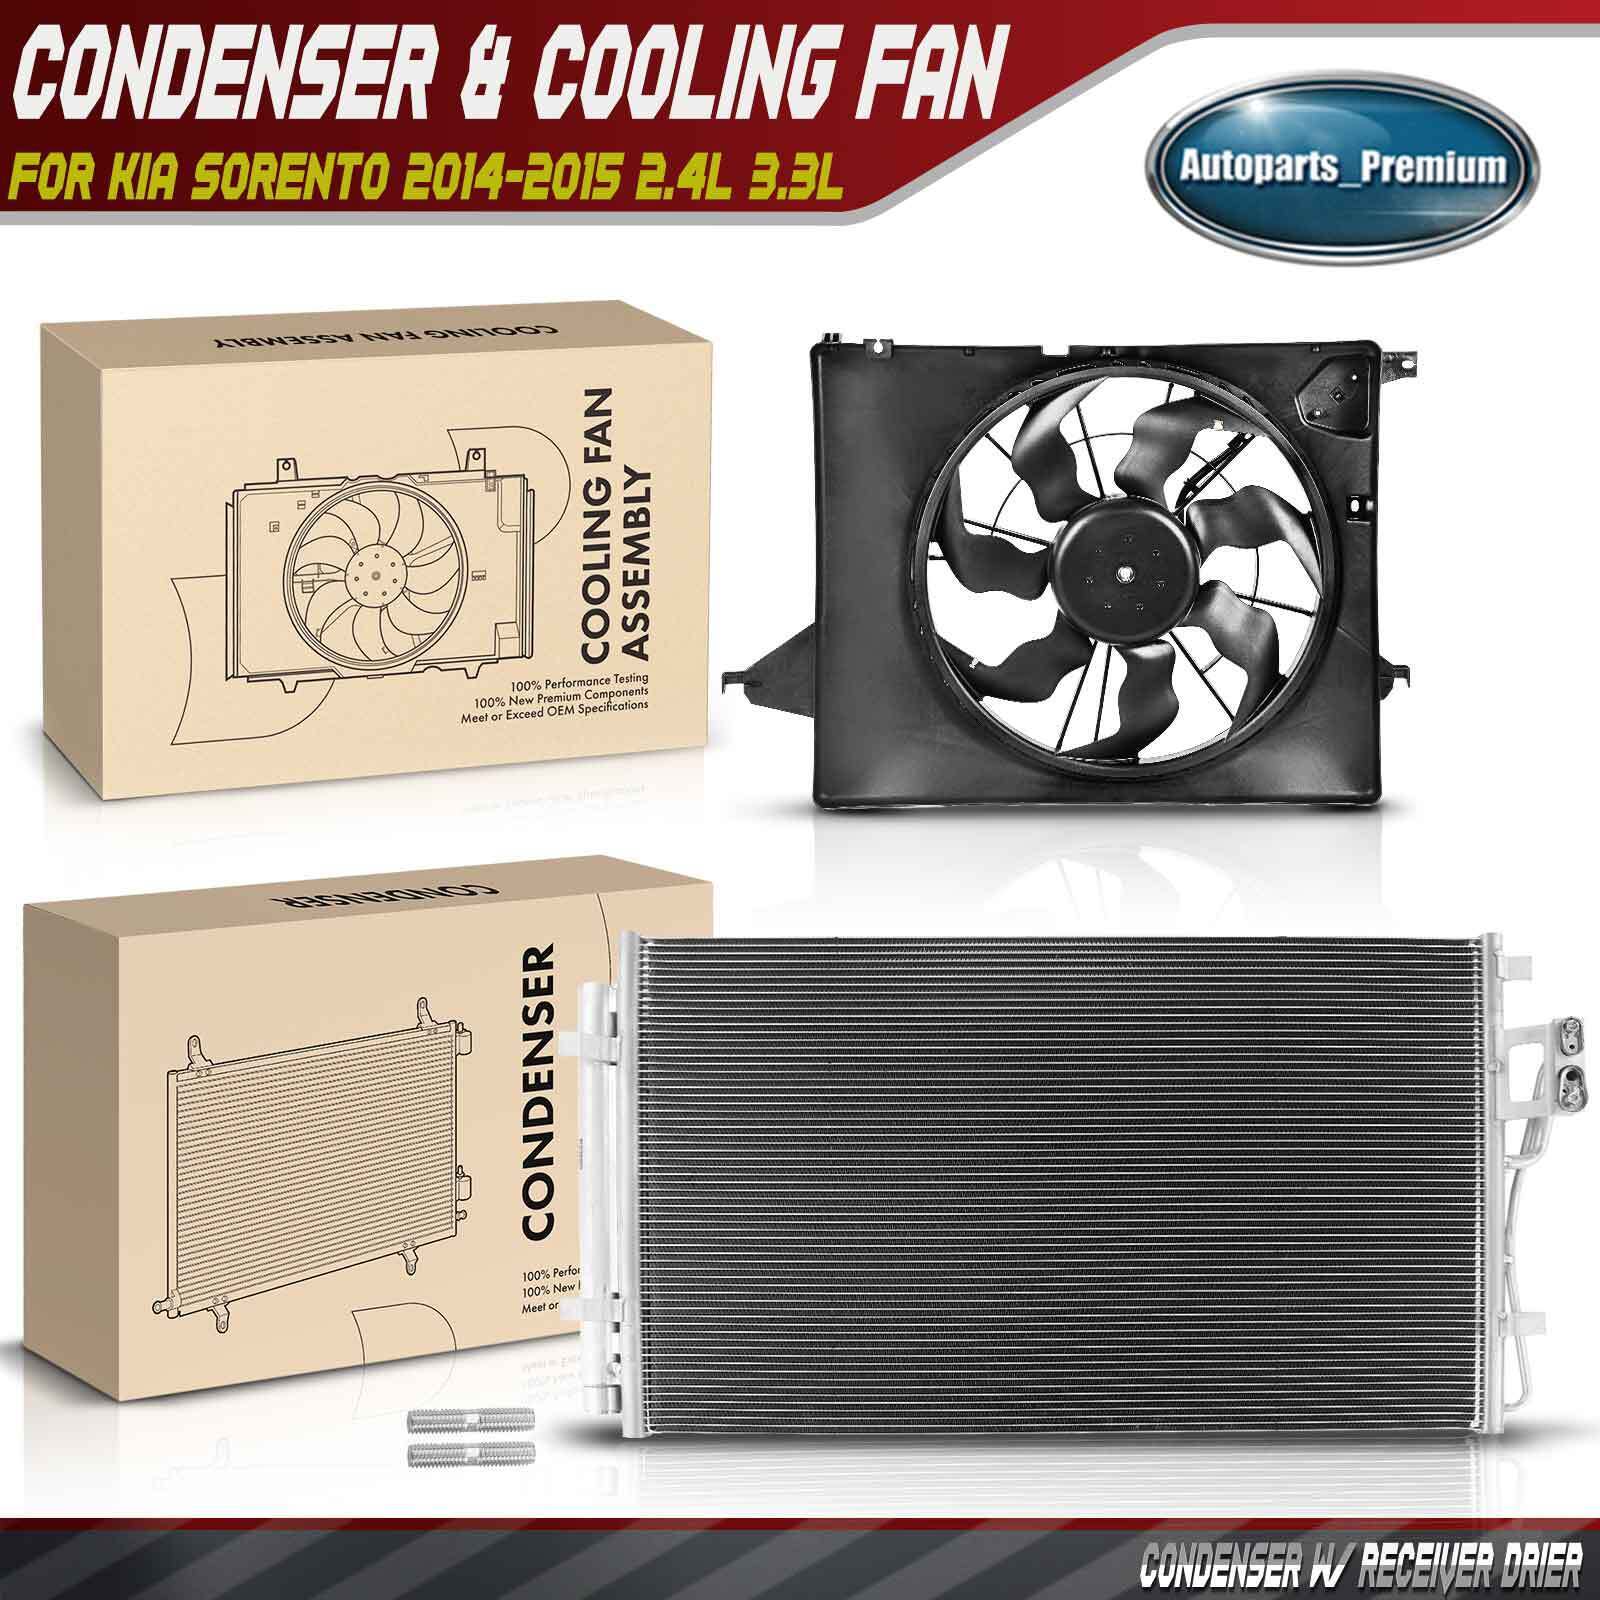 AC A/C Condenser & Cooling Fan Assembly Kit for Kia Sorento 2014-2015 2.4L 3.3L